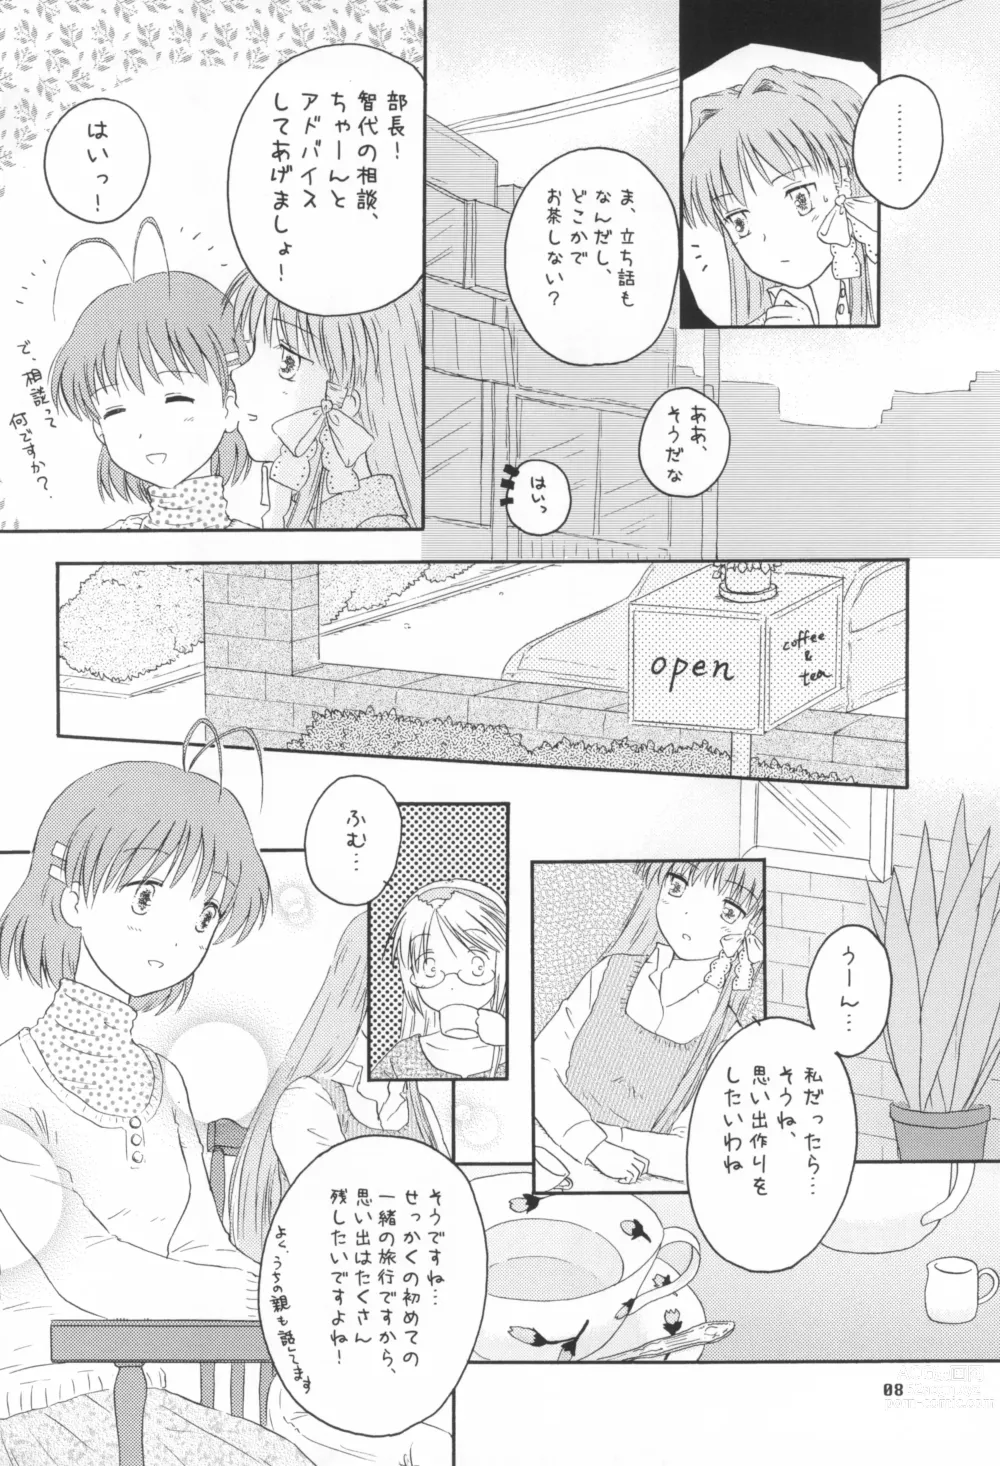 Page 7 of doujinshi A Happy Life